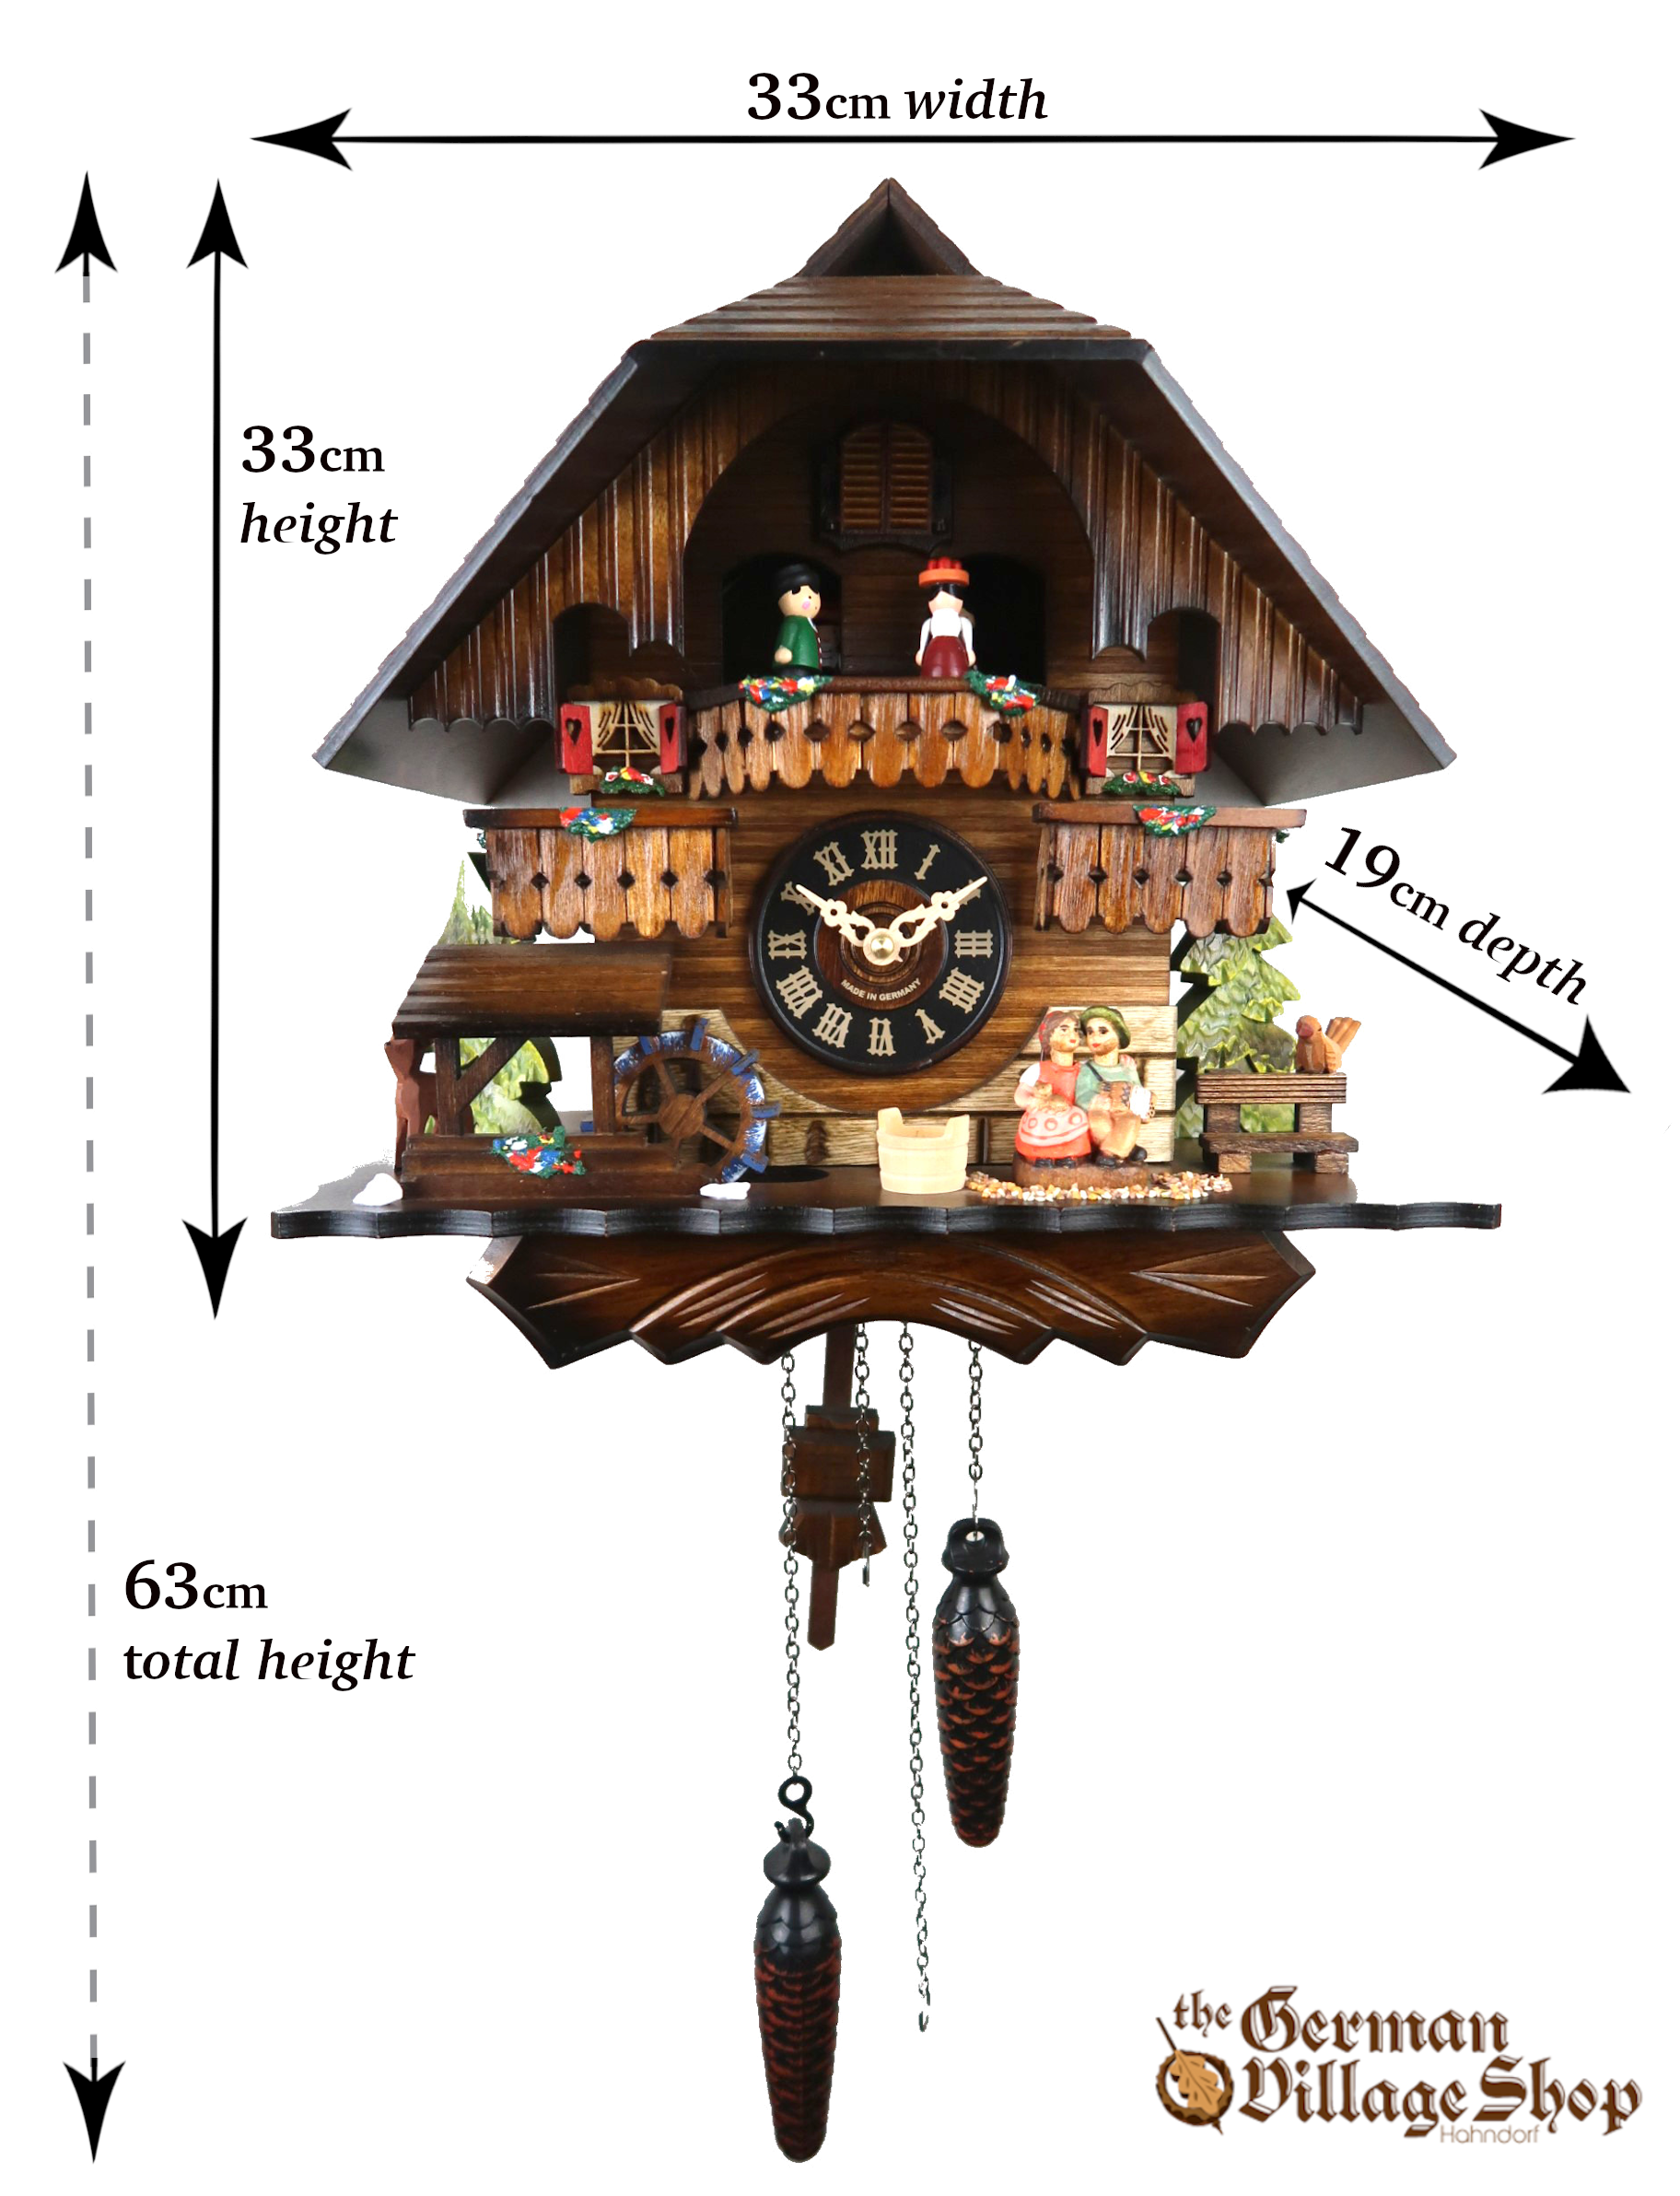 German Cuckoo Clocks imported and for sale in Australia